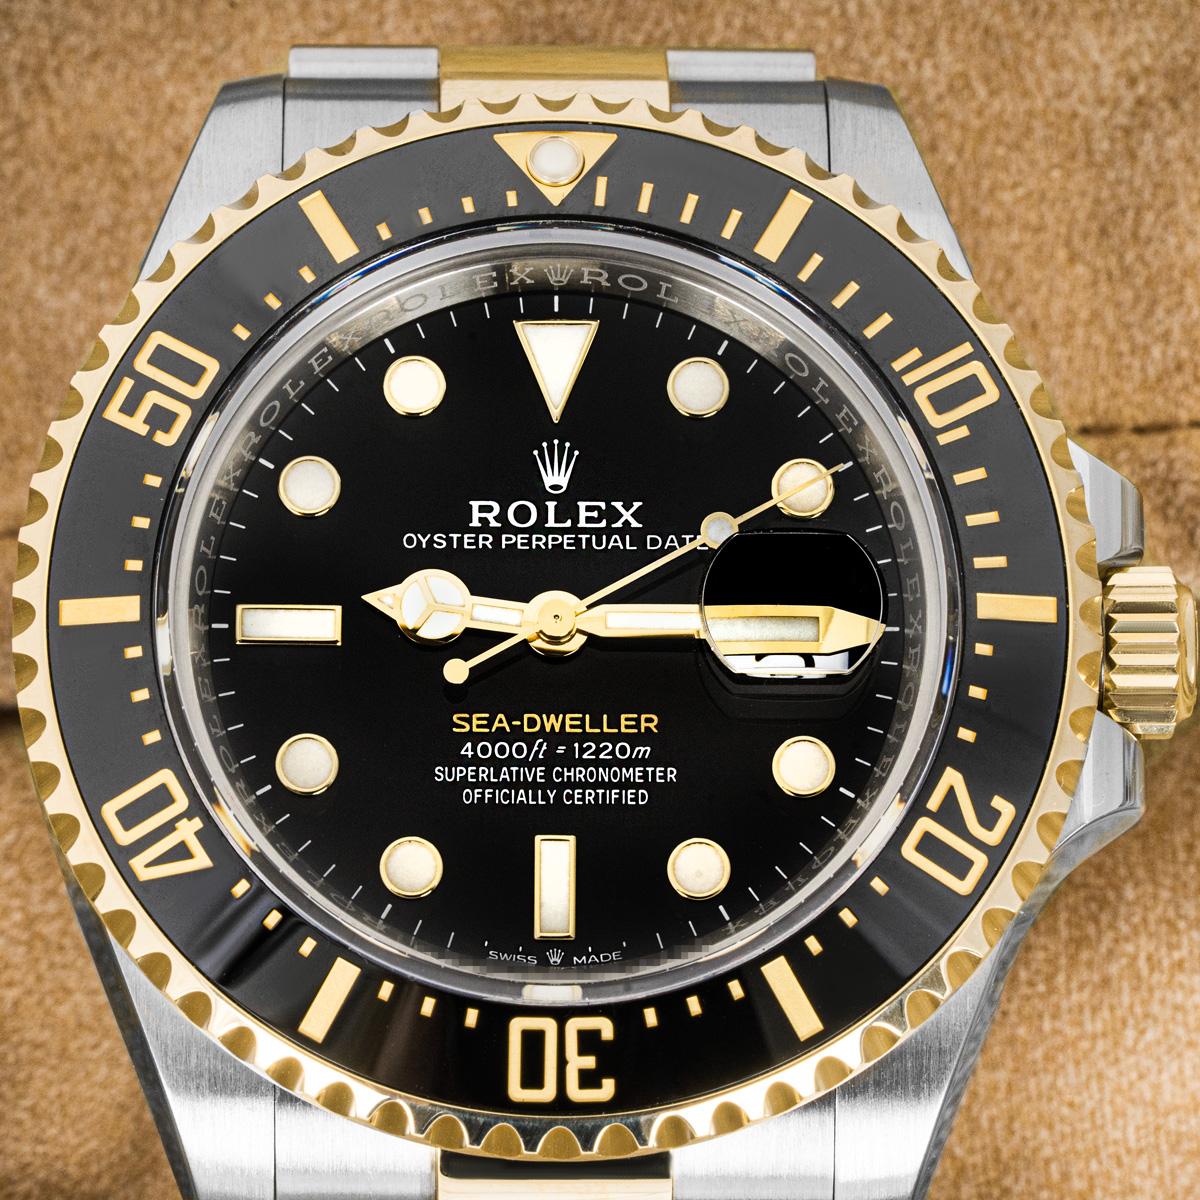 A 43mm Sea-Dweller in Oystersteel and yellow gold by Rolex. Featuring a black dial with applied hour markers and a ceramic unidirectional rotatable bezel that has 60-minute graduations coated in gold.

Fitted with a scratch-resistant sapphire